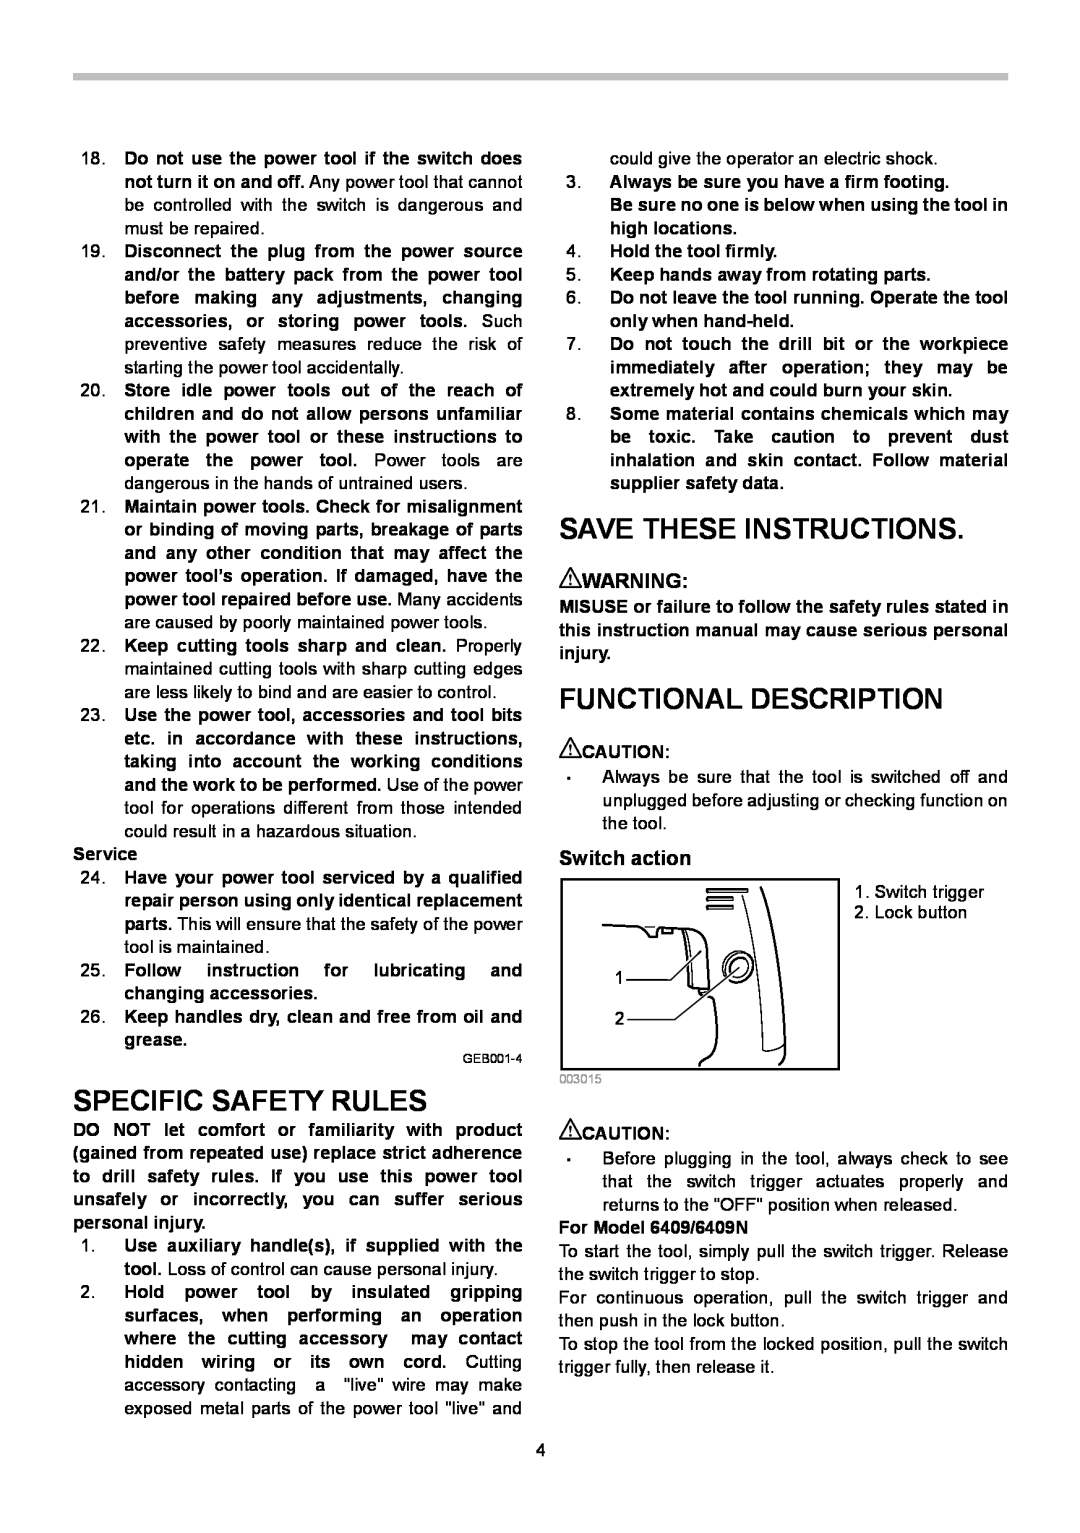 Makita 6409N, 6410 instruction manual Save These Instructions, Functional Description, Specific Safety Rules, Switch action 